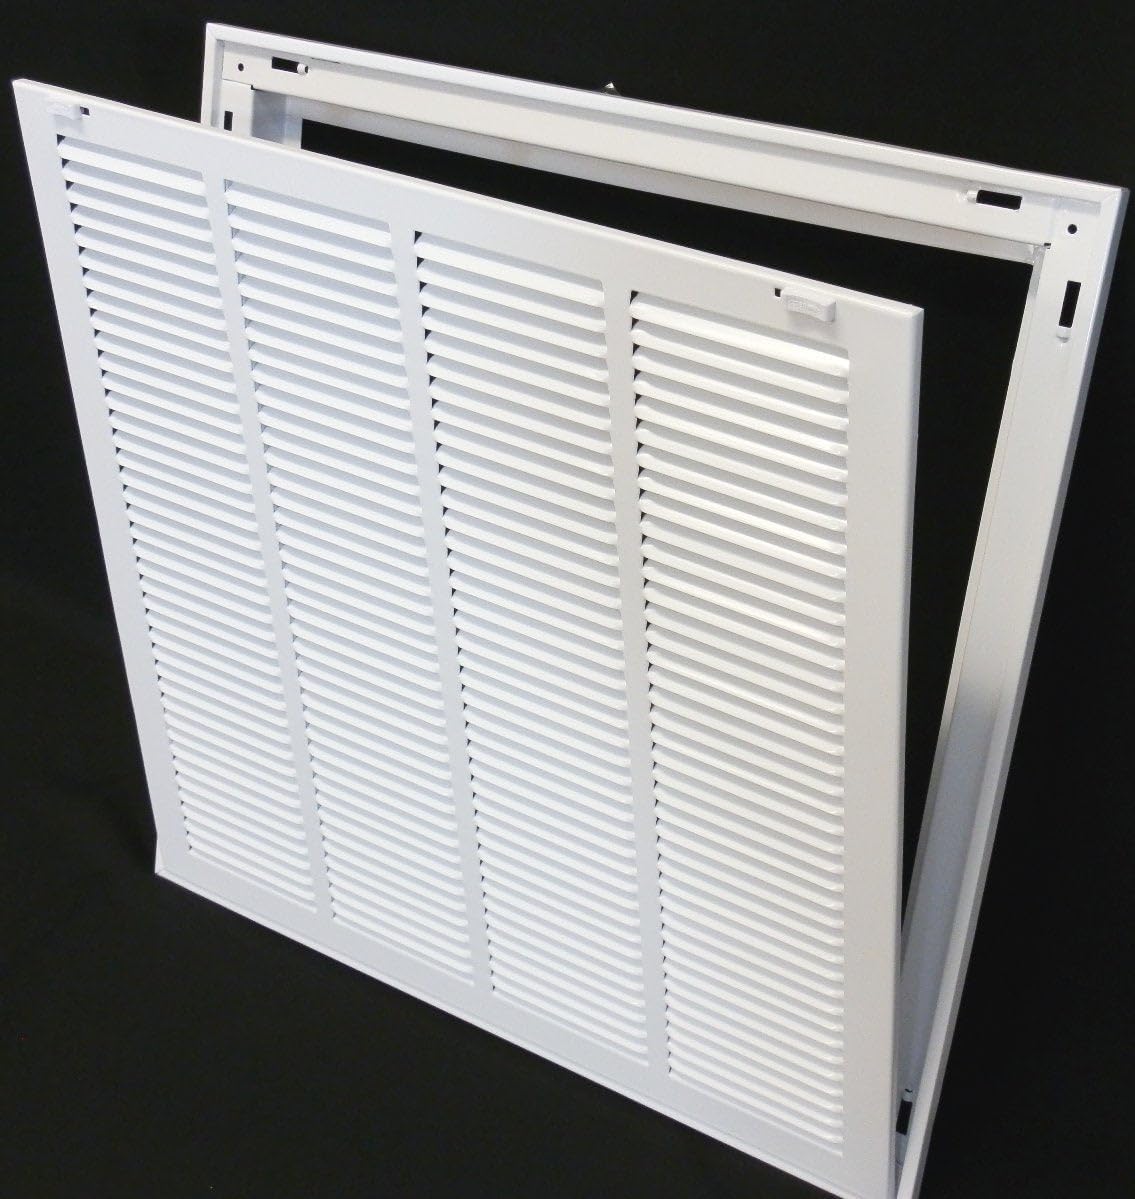 12&quot; X 18&quot; Steel Return Air Filter Grille for 1&quot; Filter - Removable Frame - [Outer Dimensions: 14 5/8&quot; X 20 5/8&quot;]